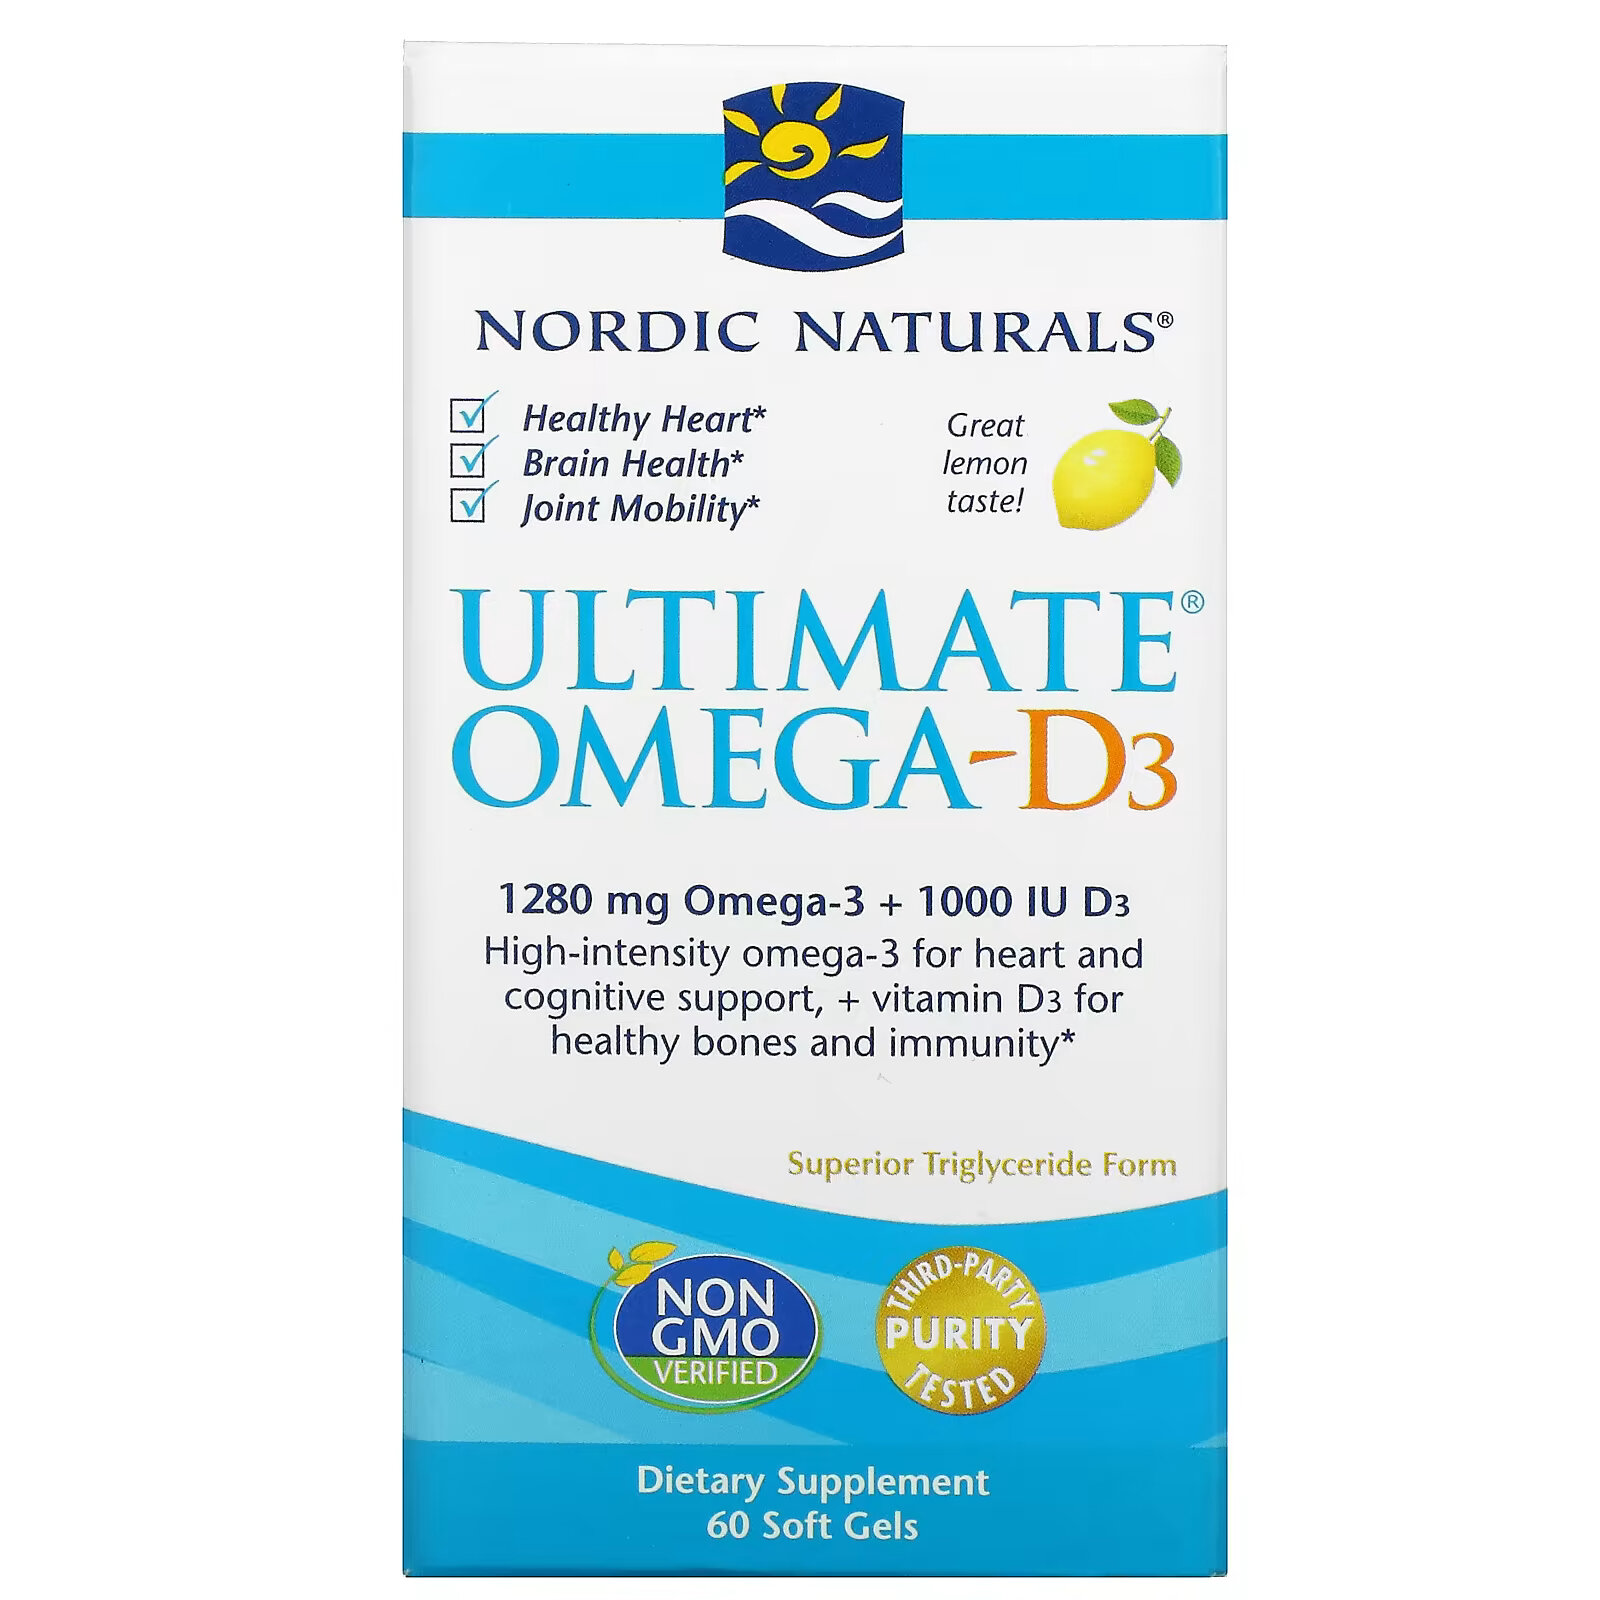 Nordic Naturals, Омега-D3 Ultimate, лимон, 1000 мг, 60 гелевых капсул nordic naturals эпк экстра лимон 820 мг 60 гелевых капсул